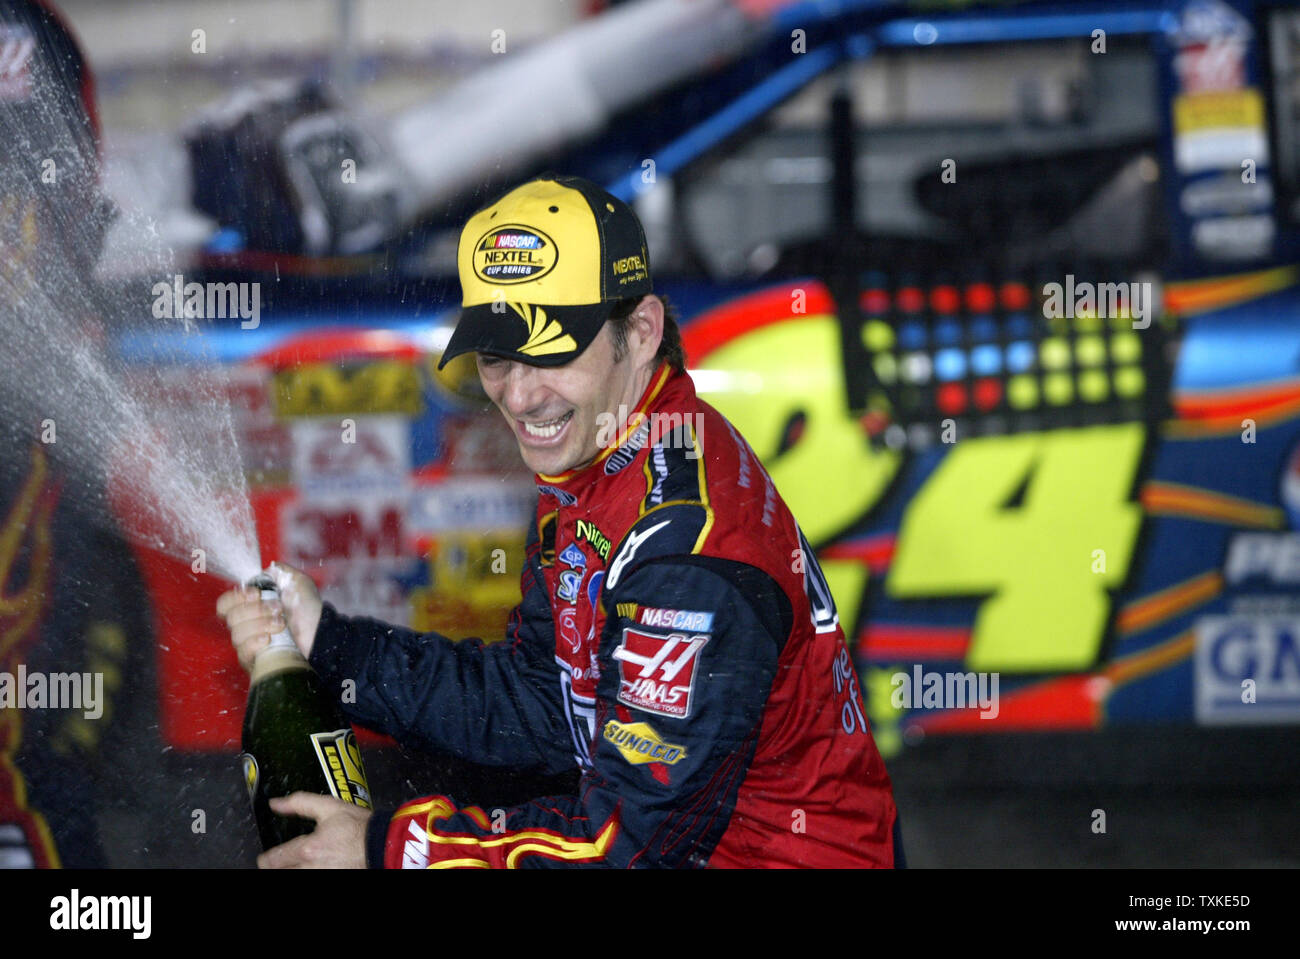 Jeff Gordon celebrates by spraying champagne  in victory lane after winning the Bank of America 500 at Lowe's Motor Speedway near Charlotte, North Carolina on October 13, 2007. (UPI Photo/Nell Redmond) Stock Photo